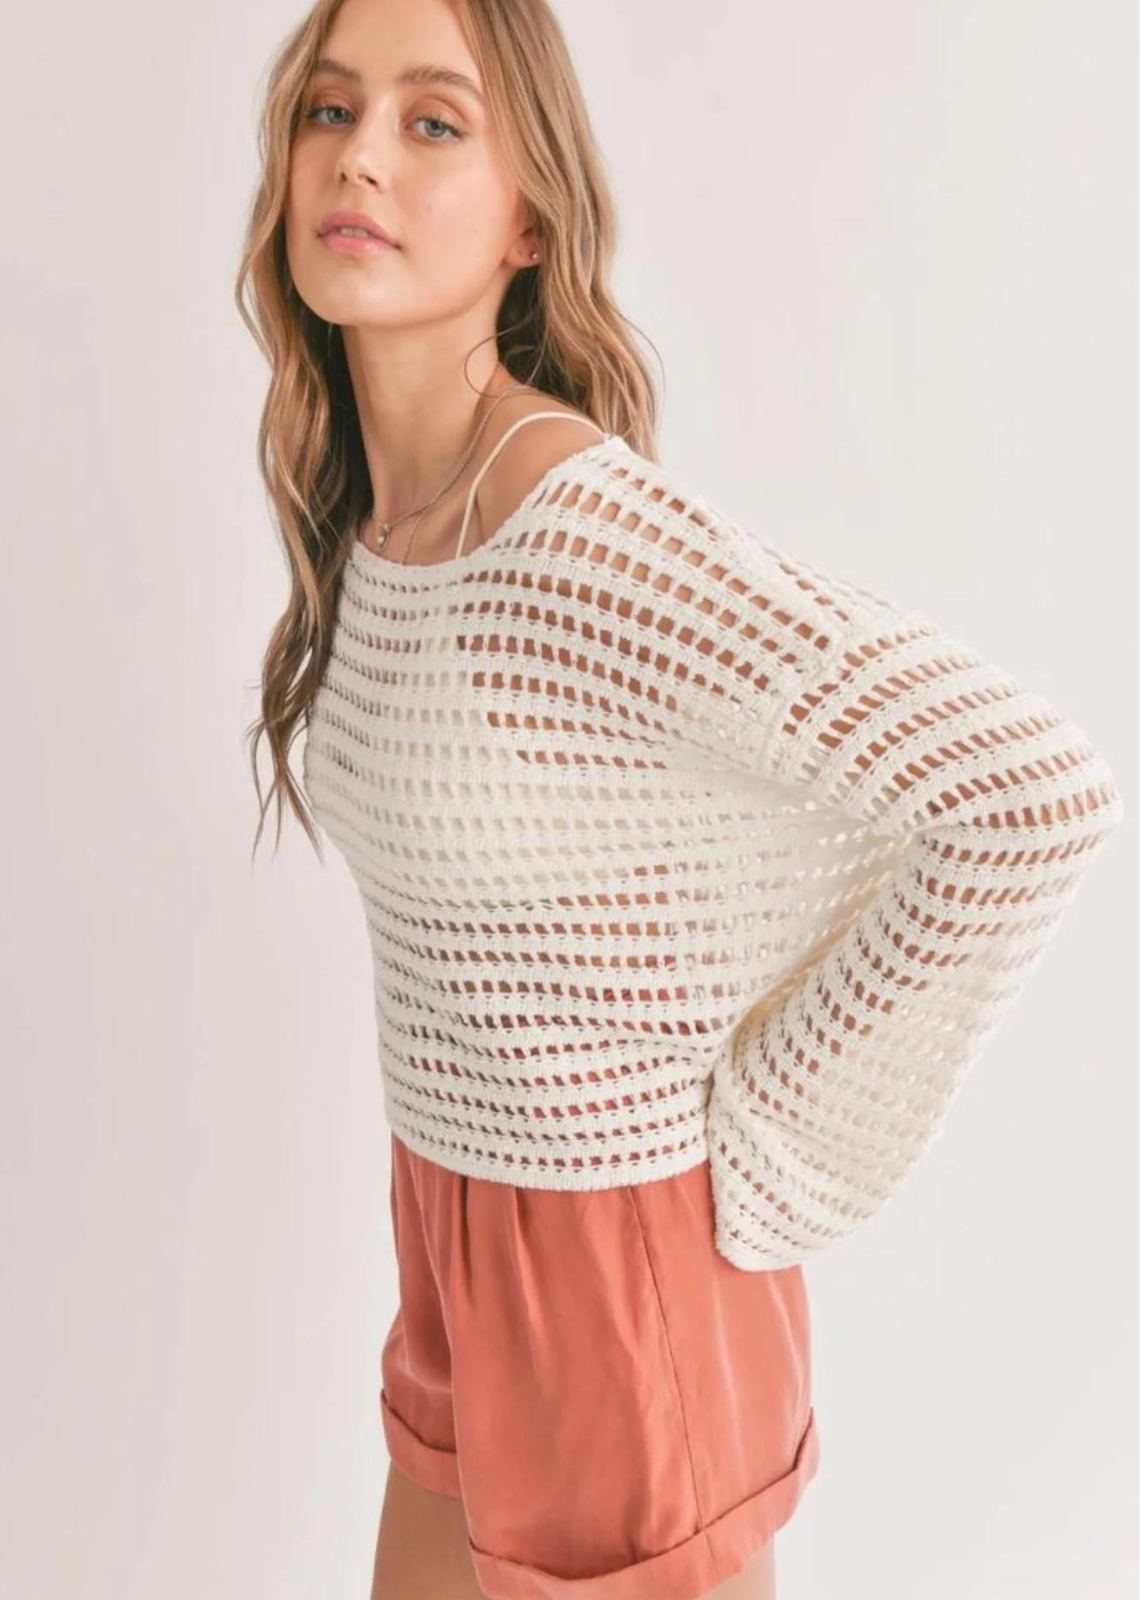 Sadie & Sage Carlita Open Knit Sweater - White. This open knit sweater is perfect for chilly days or evenings. The lightweight material keeps you comfortably warm, while the unique open knit pattern adds a touch of sophistication. The long sleeves offer both style and coverage, and the loose fit allows for unrestricted movement. A versatile piece that can be worn solo or layered, this sweater is a must-have for any fashion-forward wardrobe.